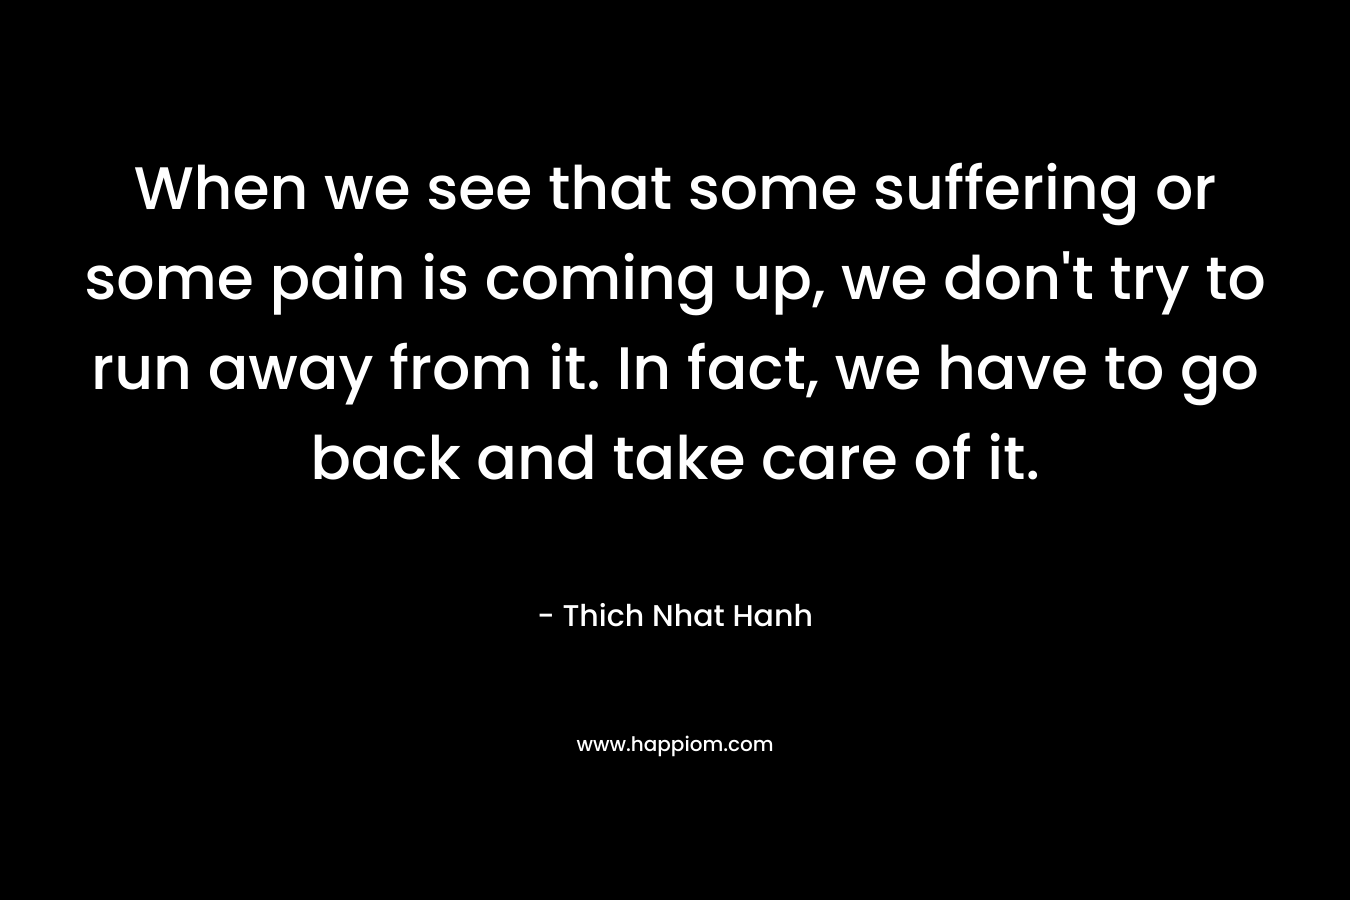 When we see that some suffering or some pain is coming up, we don't try to run away from it. In fact, we have to go back and take care of it.